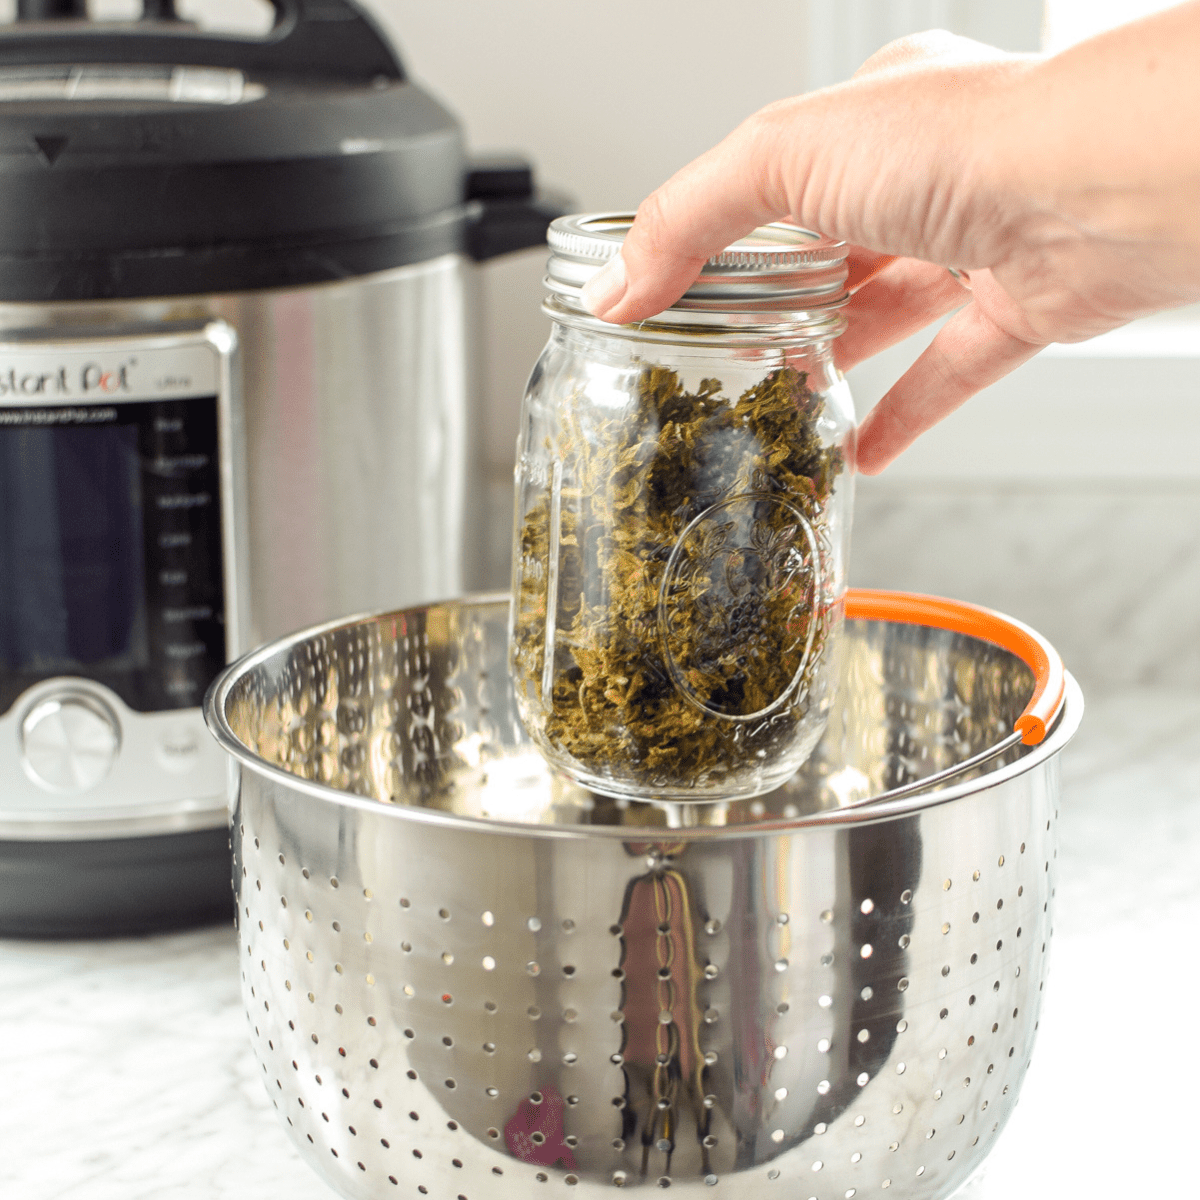 How To Get Rid Of That Nasty Smell In Your Instant Pot